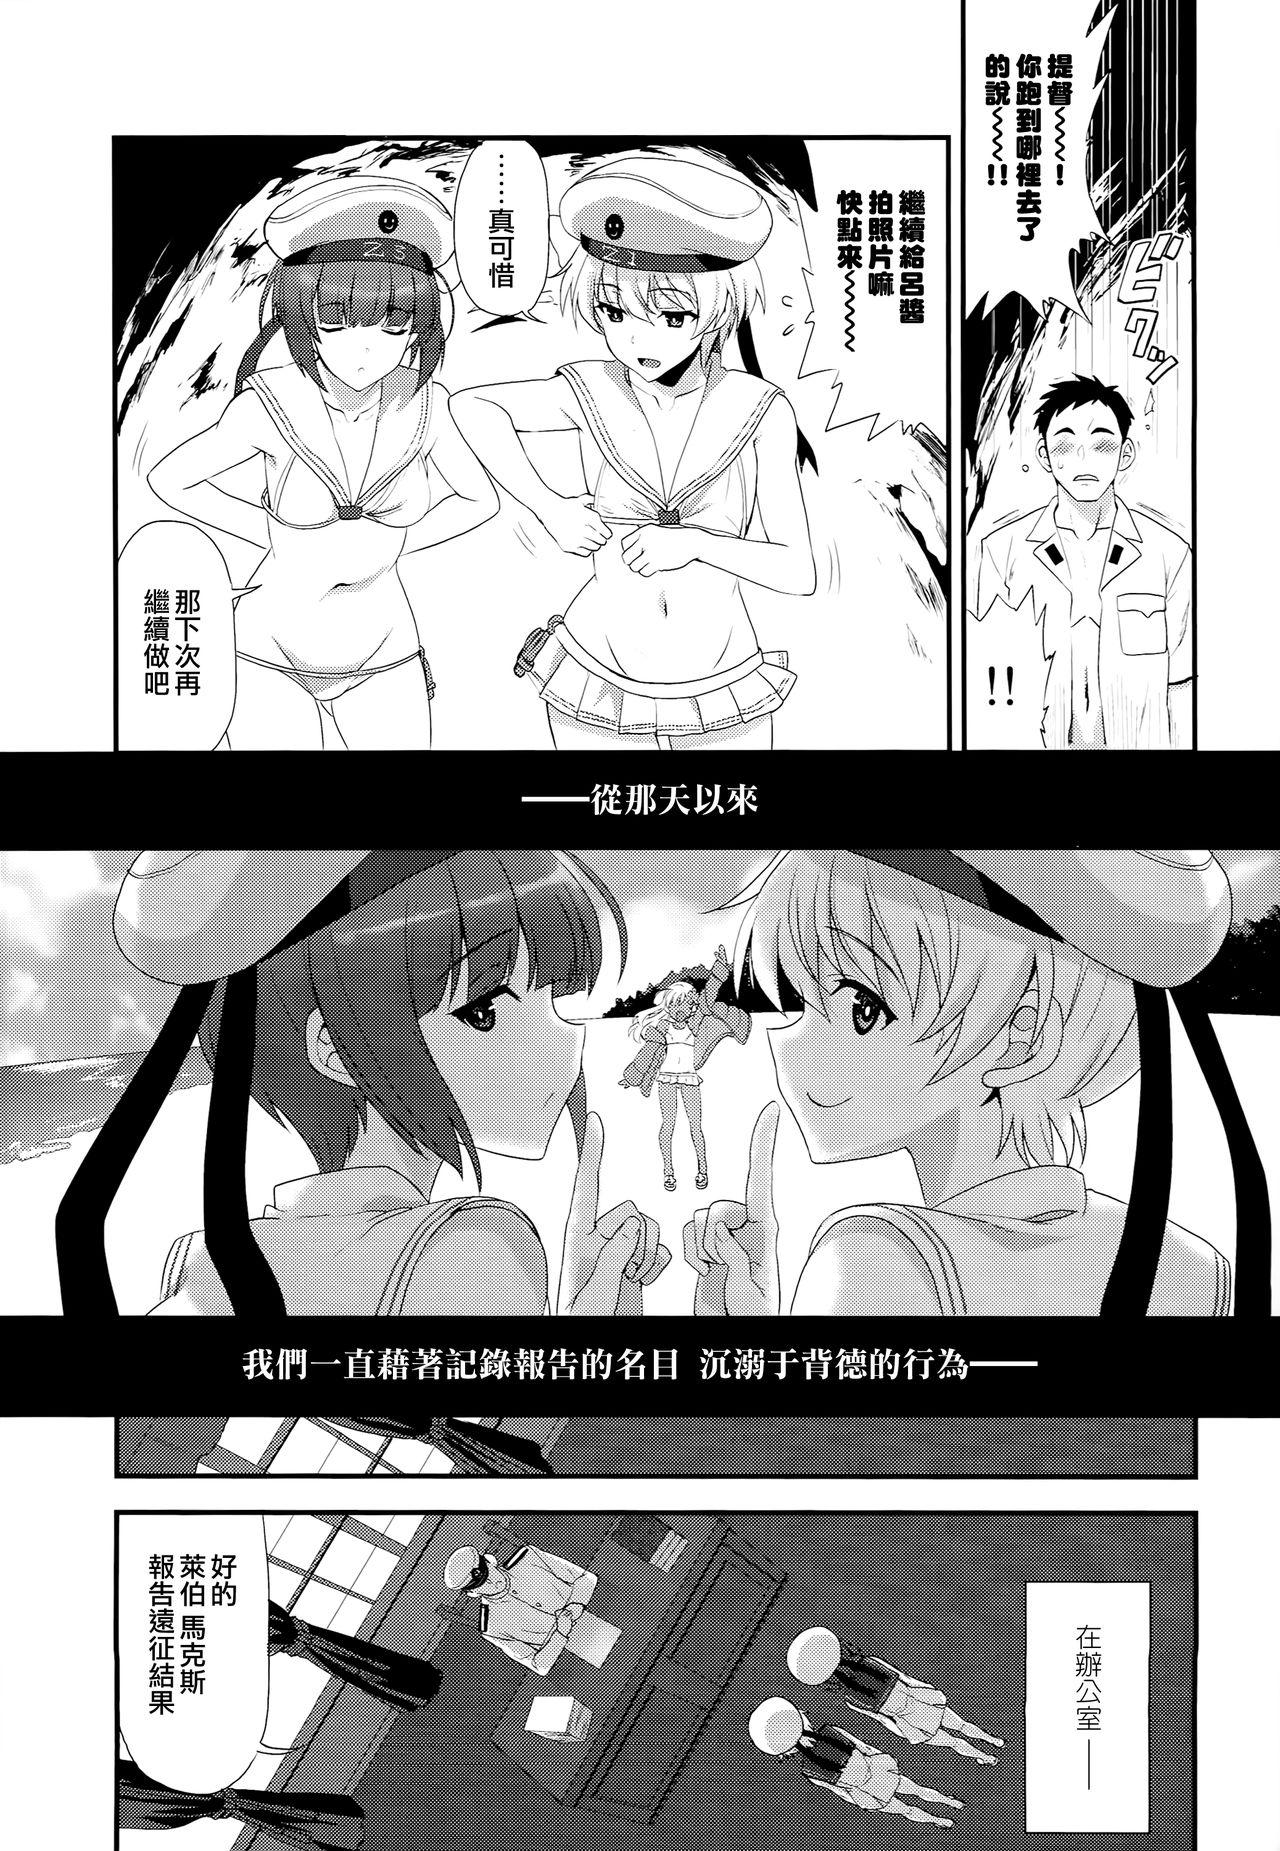 Awesome Apfelschorle - Kantai collection Masterbate - Page 11